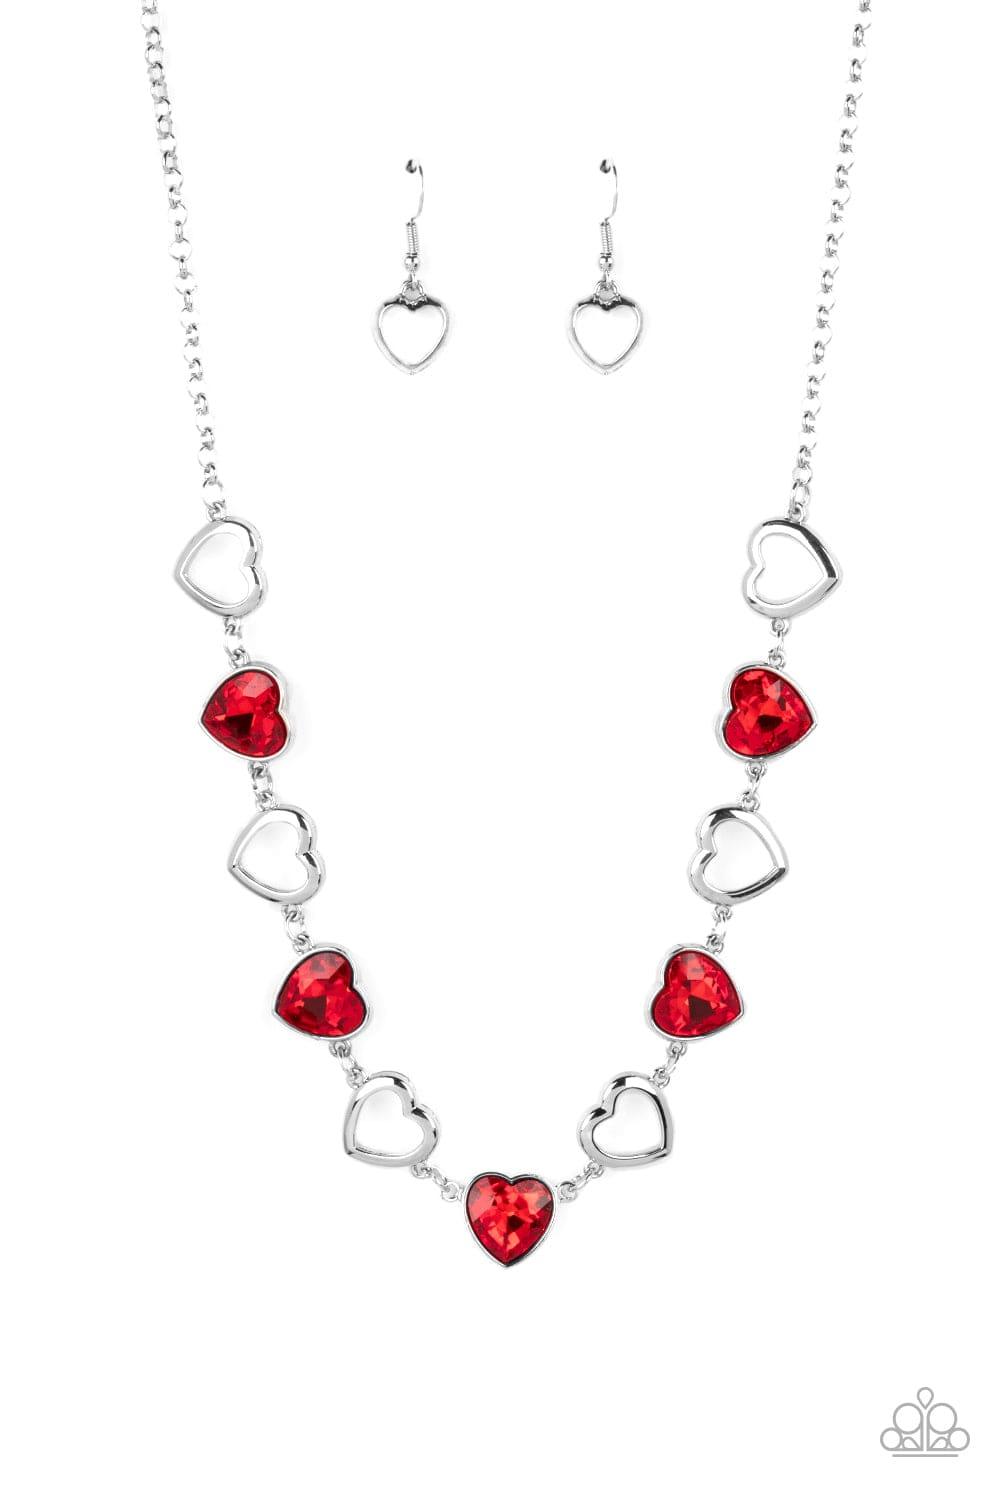 Paparazzi Accessories - Contemporary Cupid - Red Necklace - Bling by JessieK